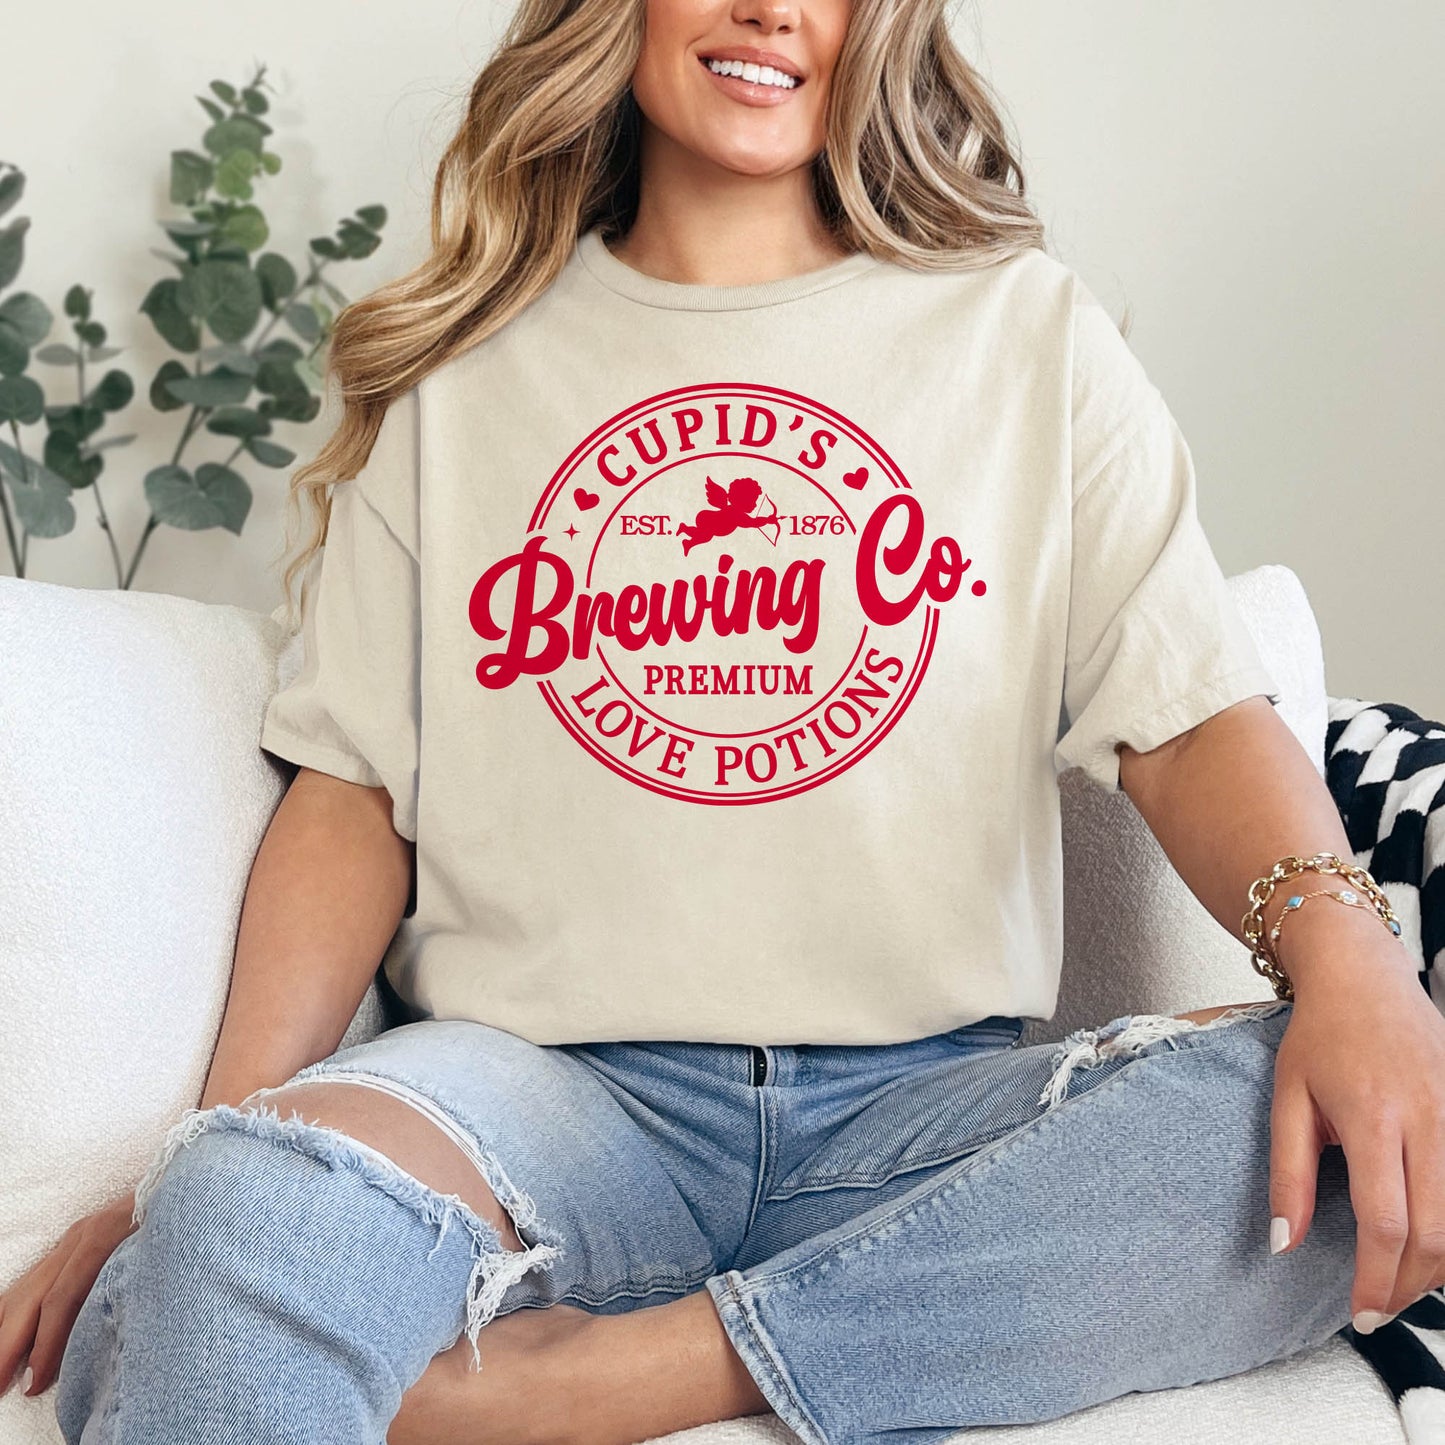 Cupid's Brewing Valentine's Day Shirt